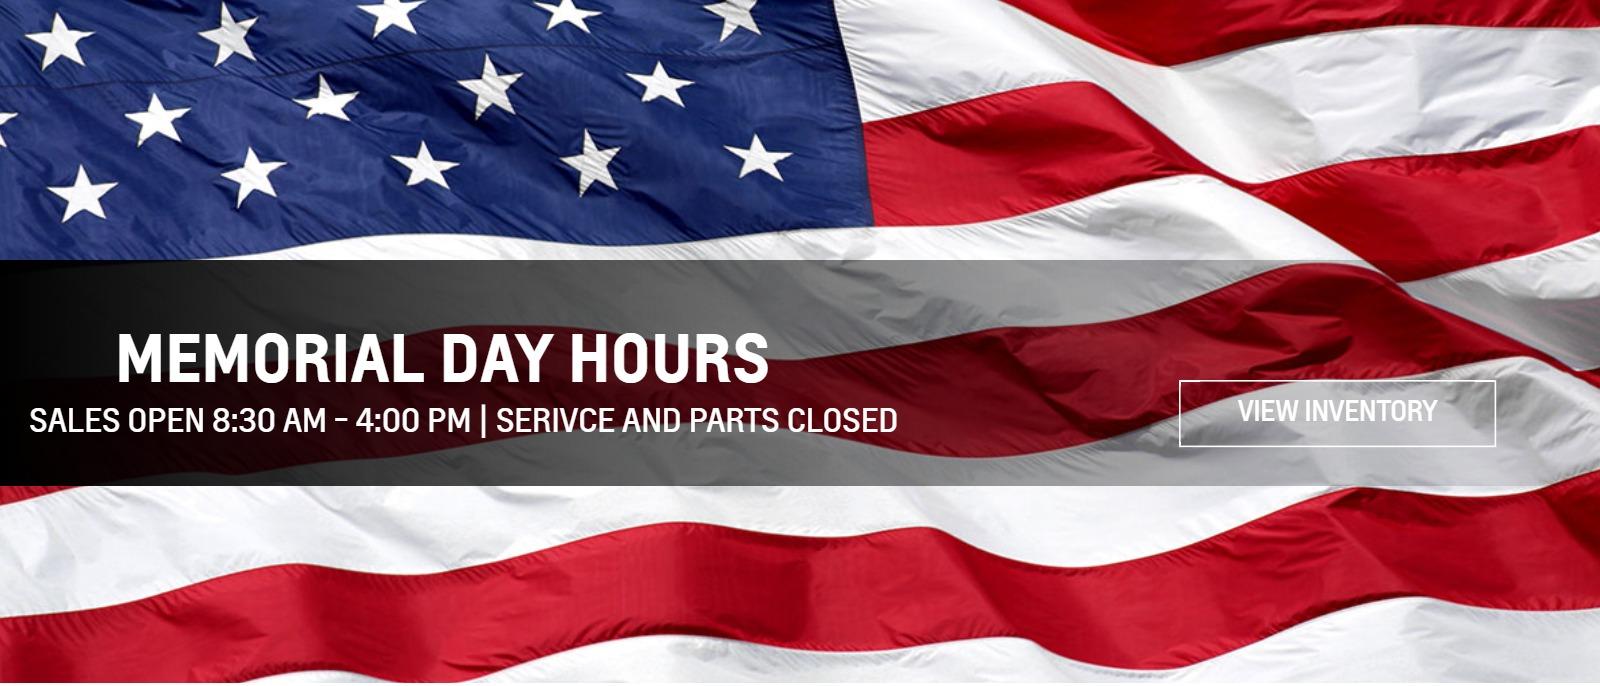 MEMORIAL DAY HOURS
SALES OPEN 8:30 AM - 4:00 PM
SERIVCE AND PARTS CLOSED